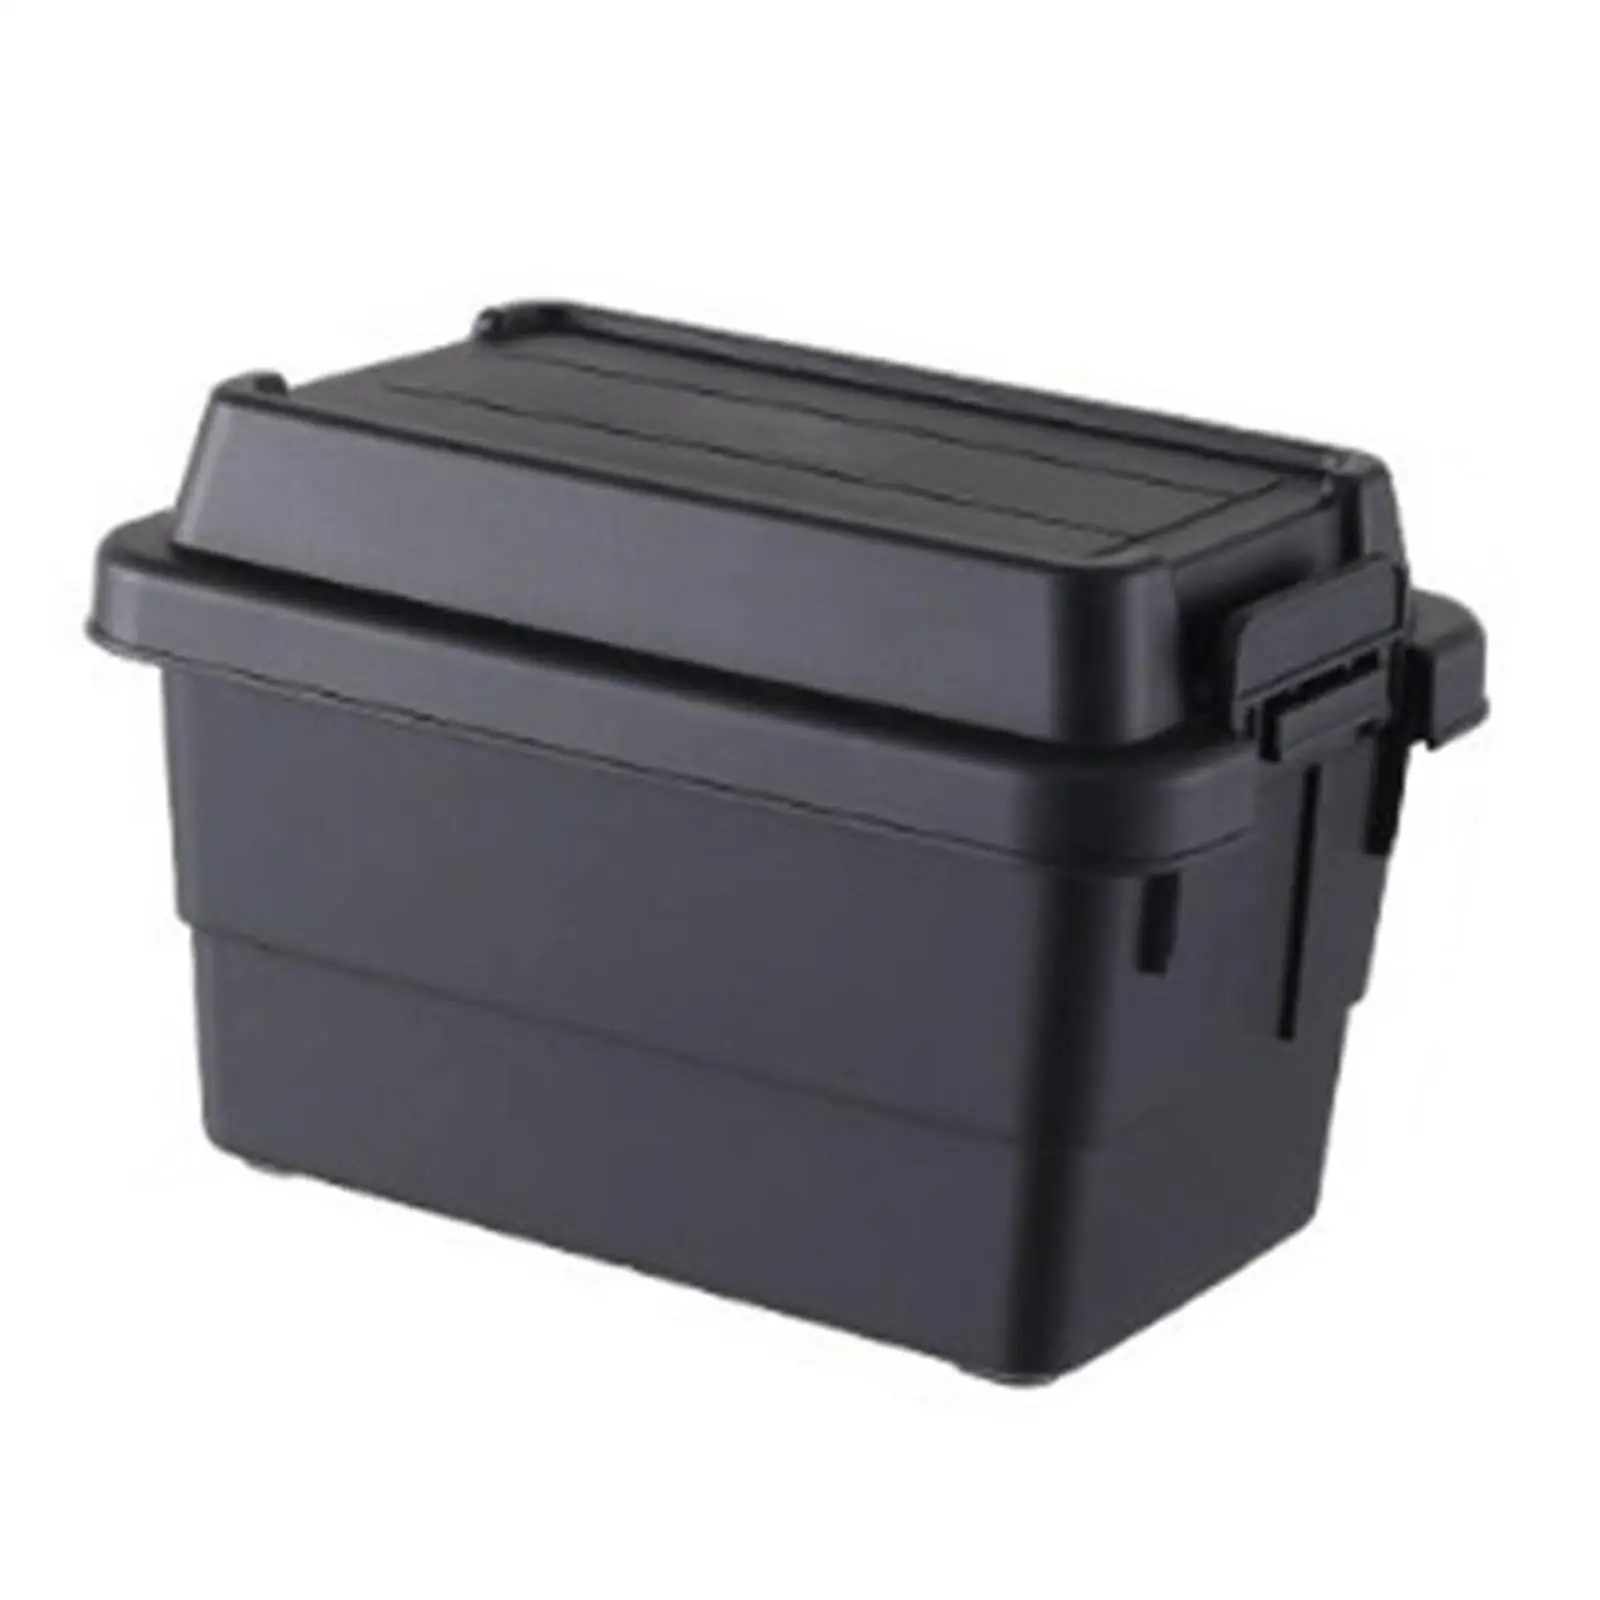 Camping Storage Box Lockable Storage Bin with Lid Durable Small Storage Case for